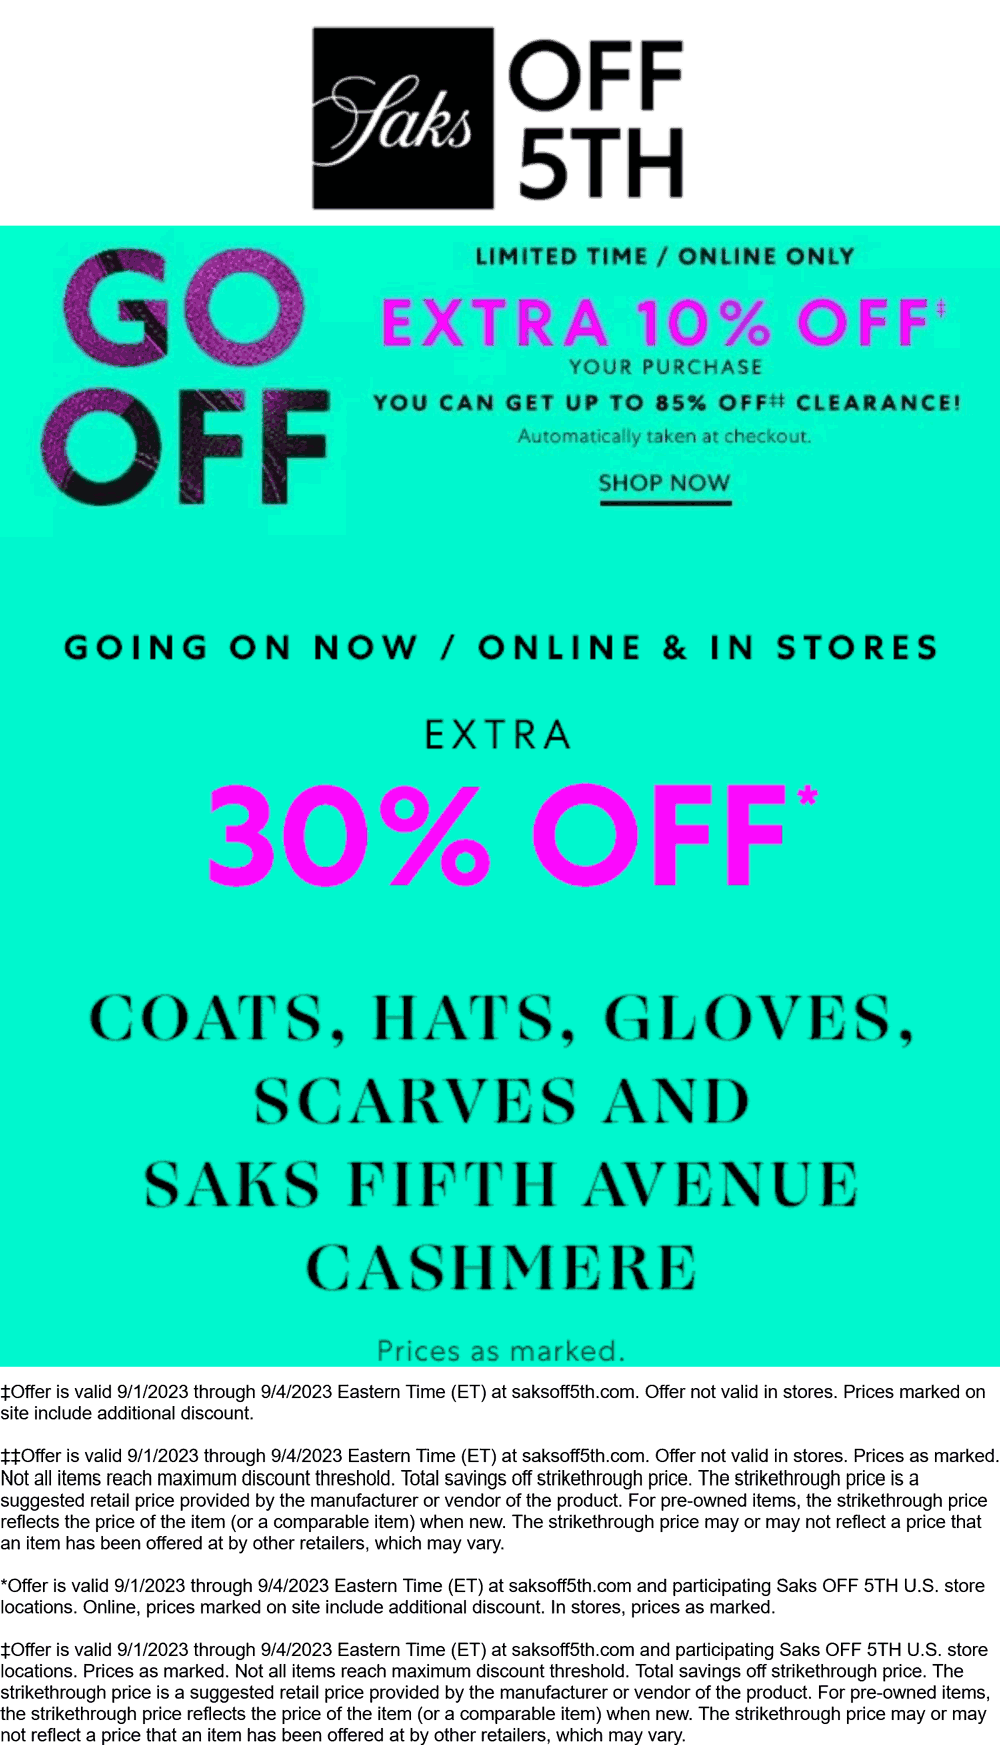 Saks OFF 5TH stores Coupon  Extra 30% off today at Saks OFF 5TH, ditto online #saksoff5th 